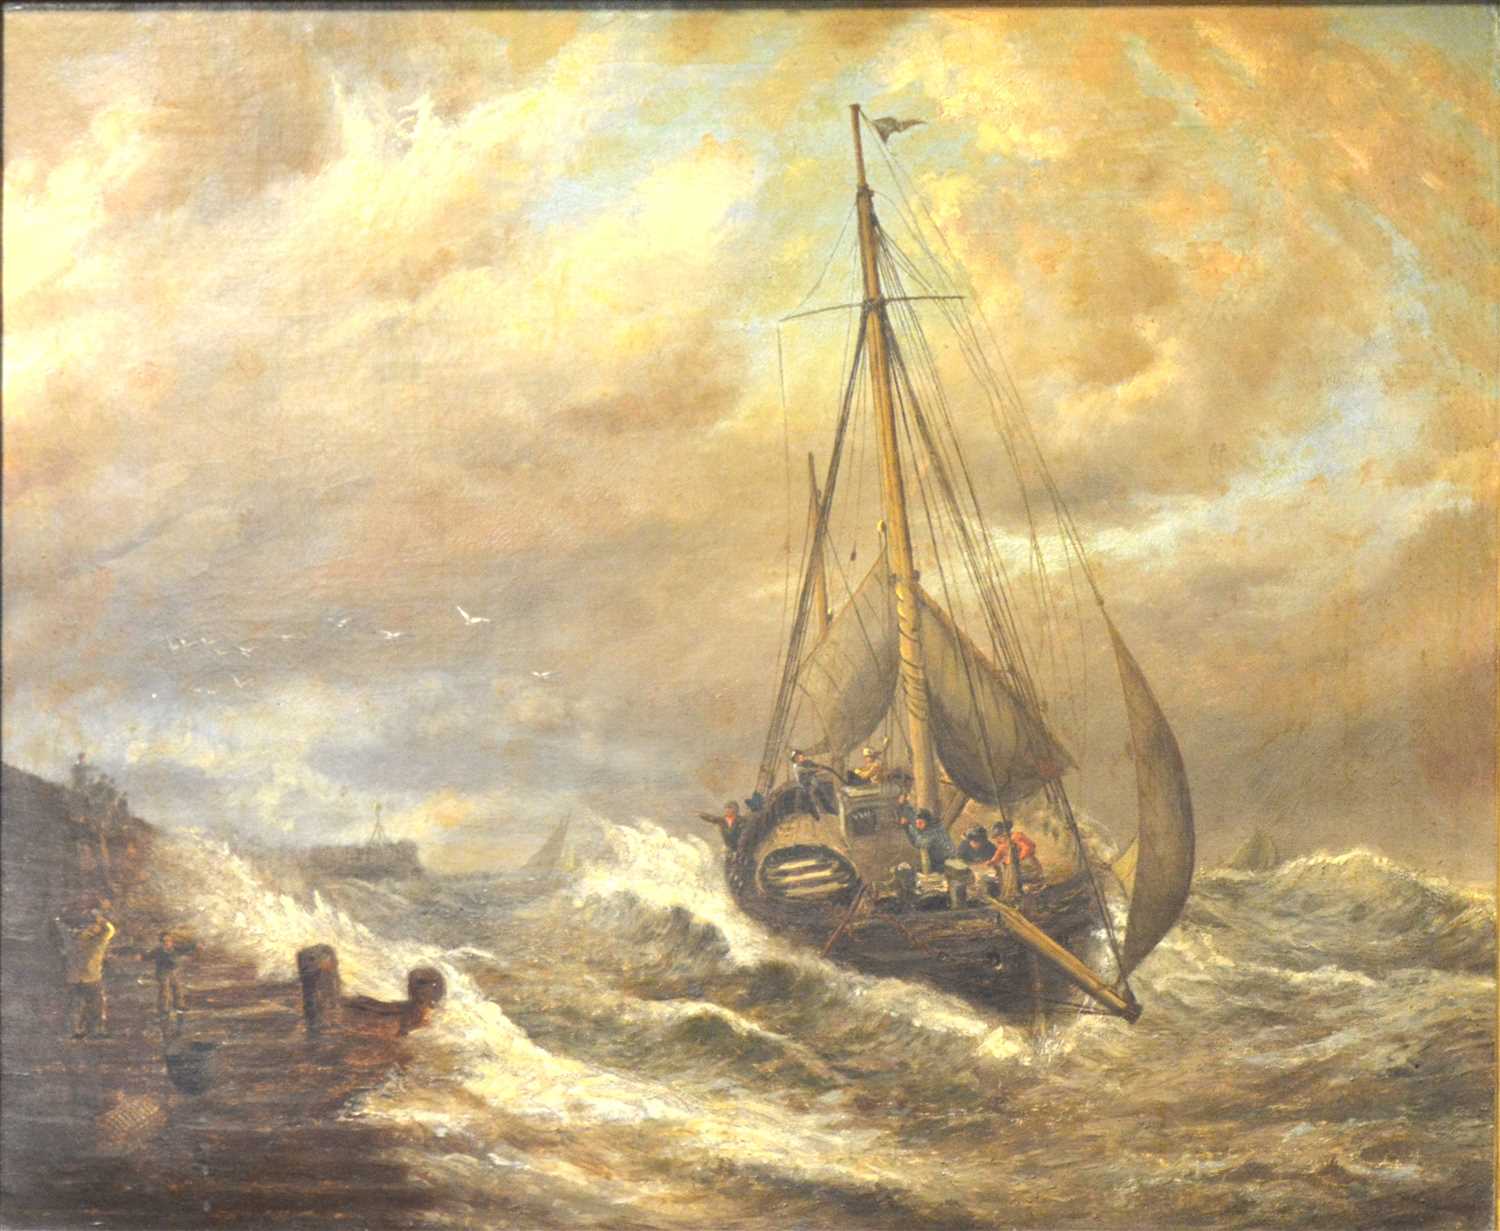 Lot 268 - Follower of George Callow, Fishing smack by the coast